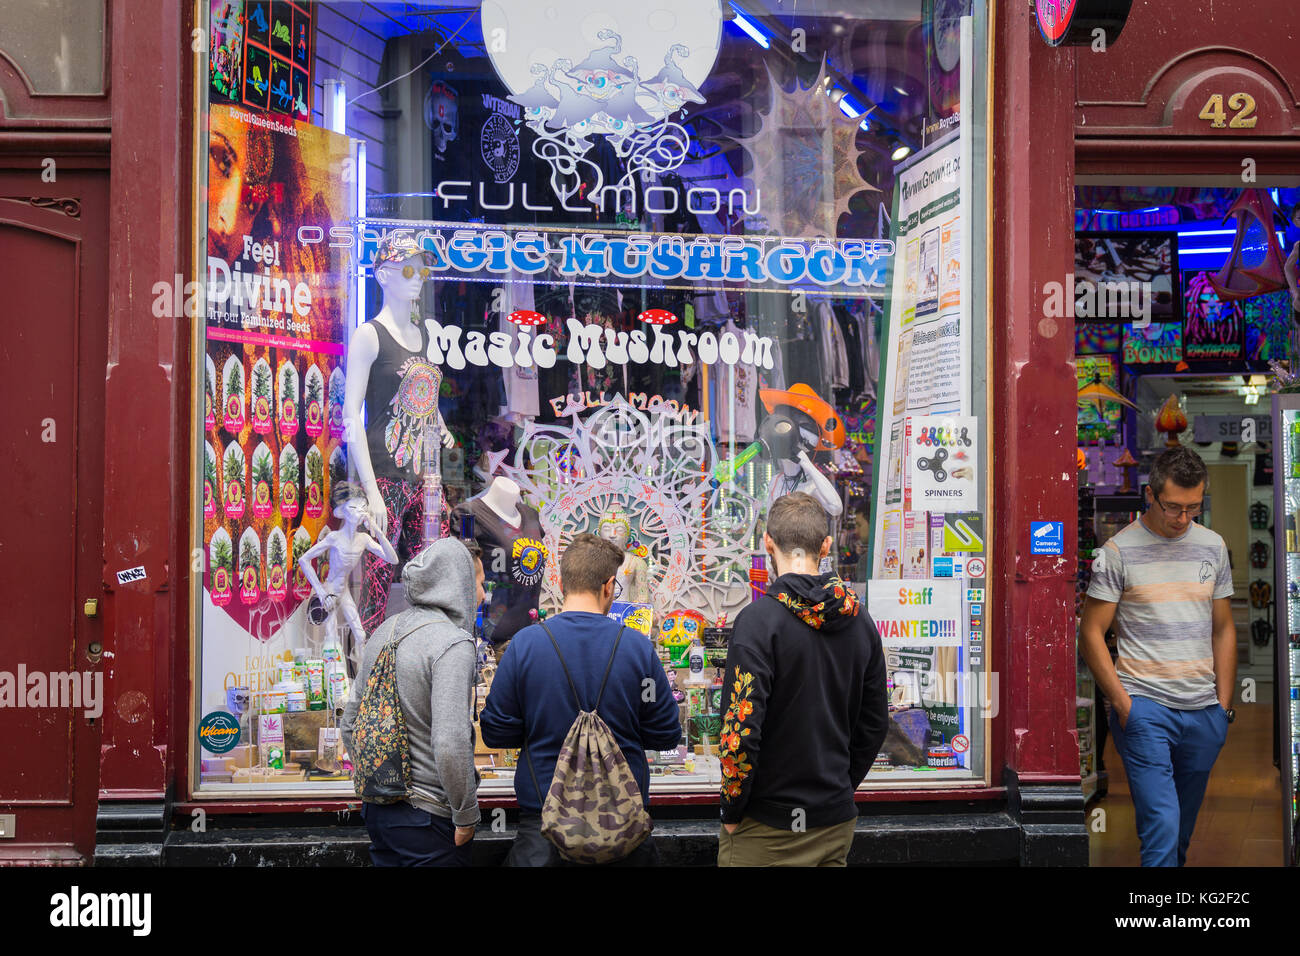 AMSTERDAM, HOLLAND - AUGUST 21, 2017; Three young guys window shop the display in shop selling range of psychedelic paraphenalia wihlie man stands in  Stock Photo